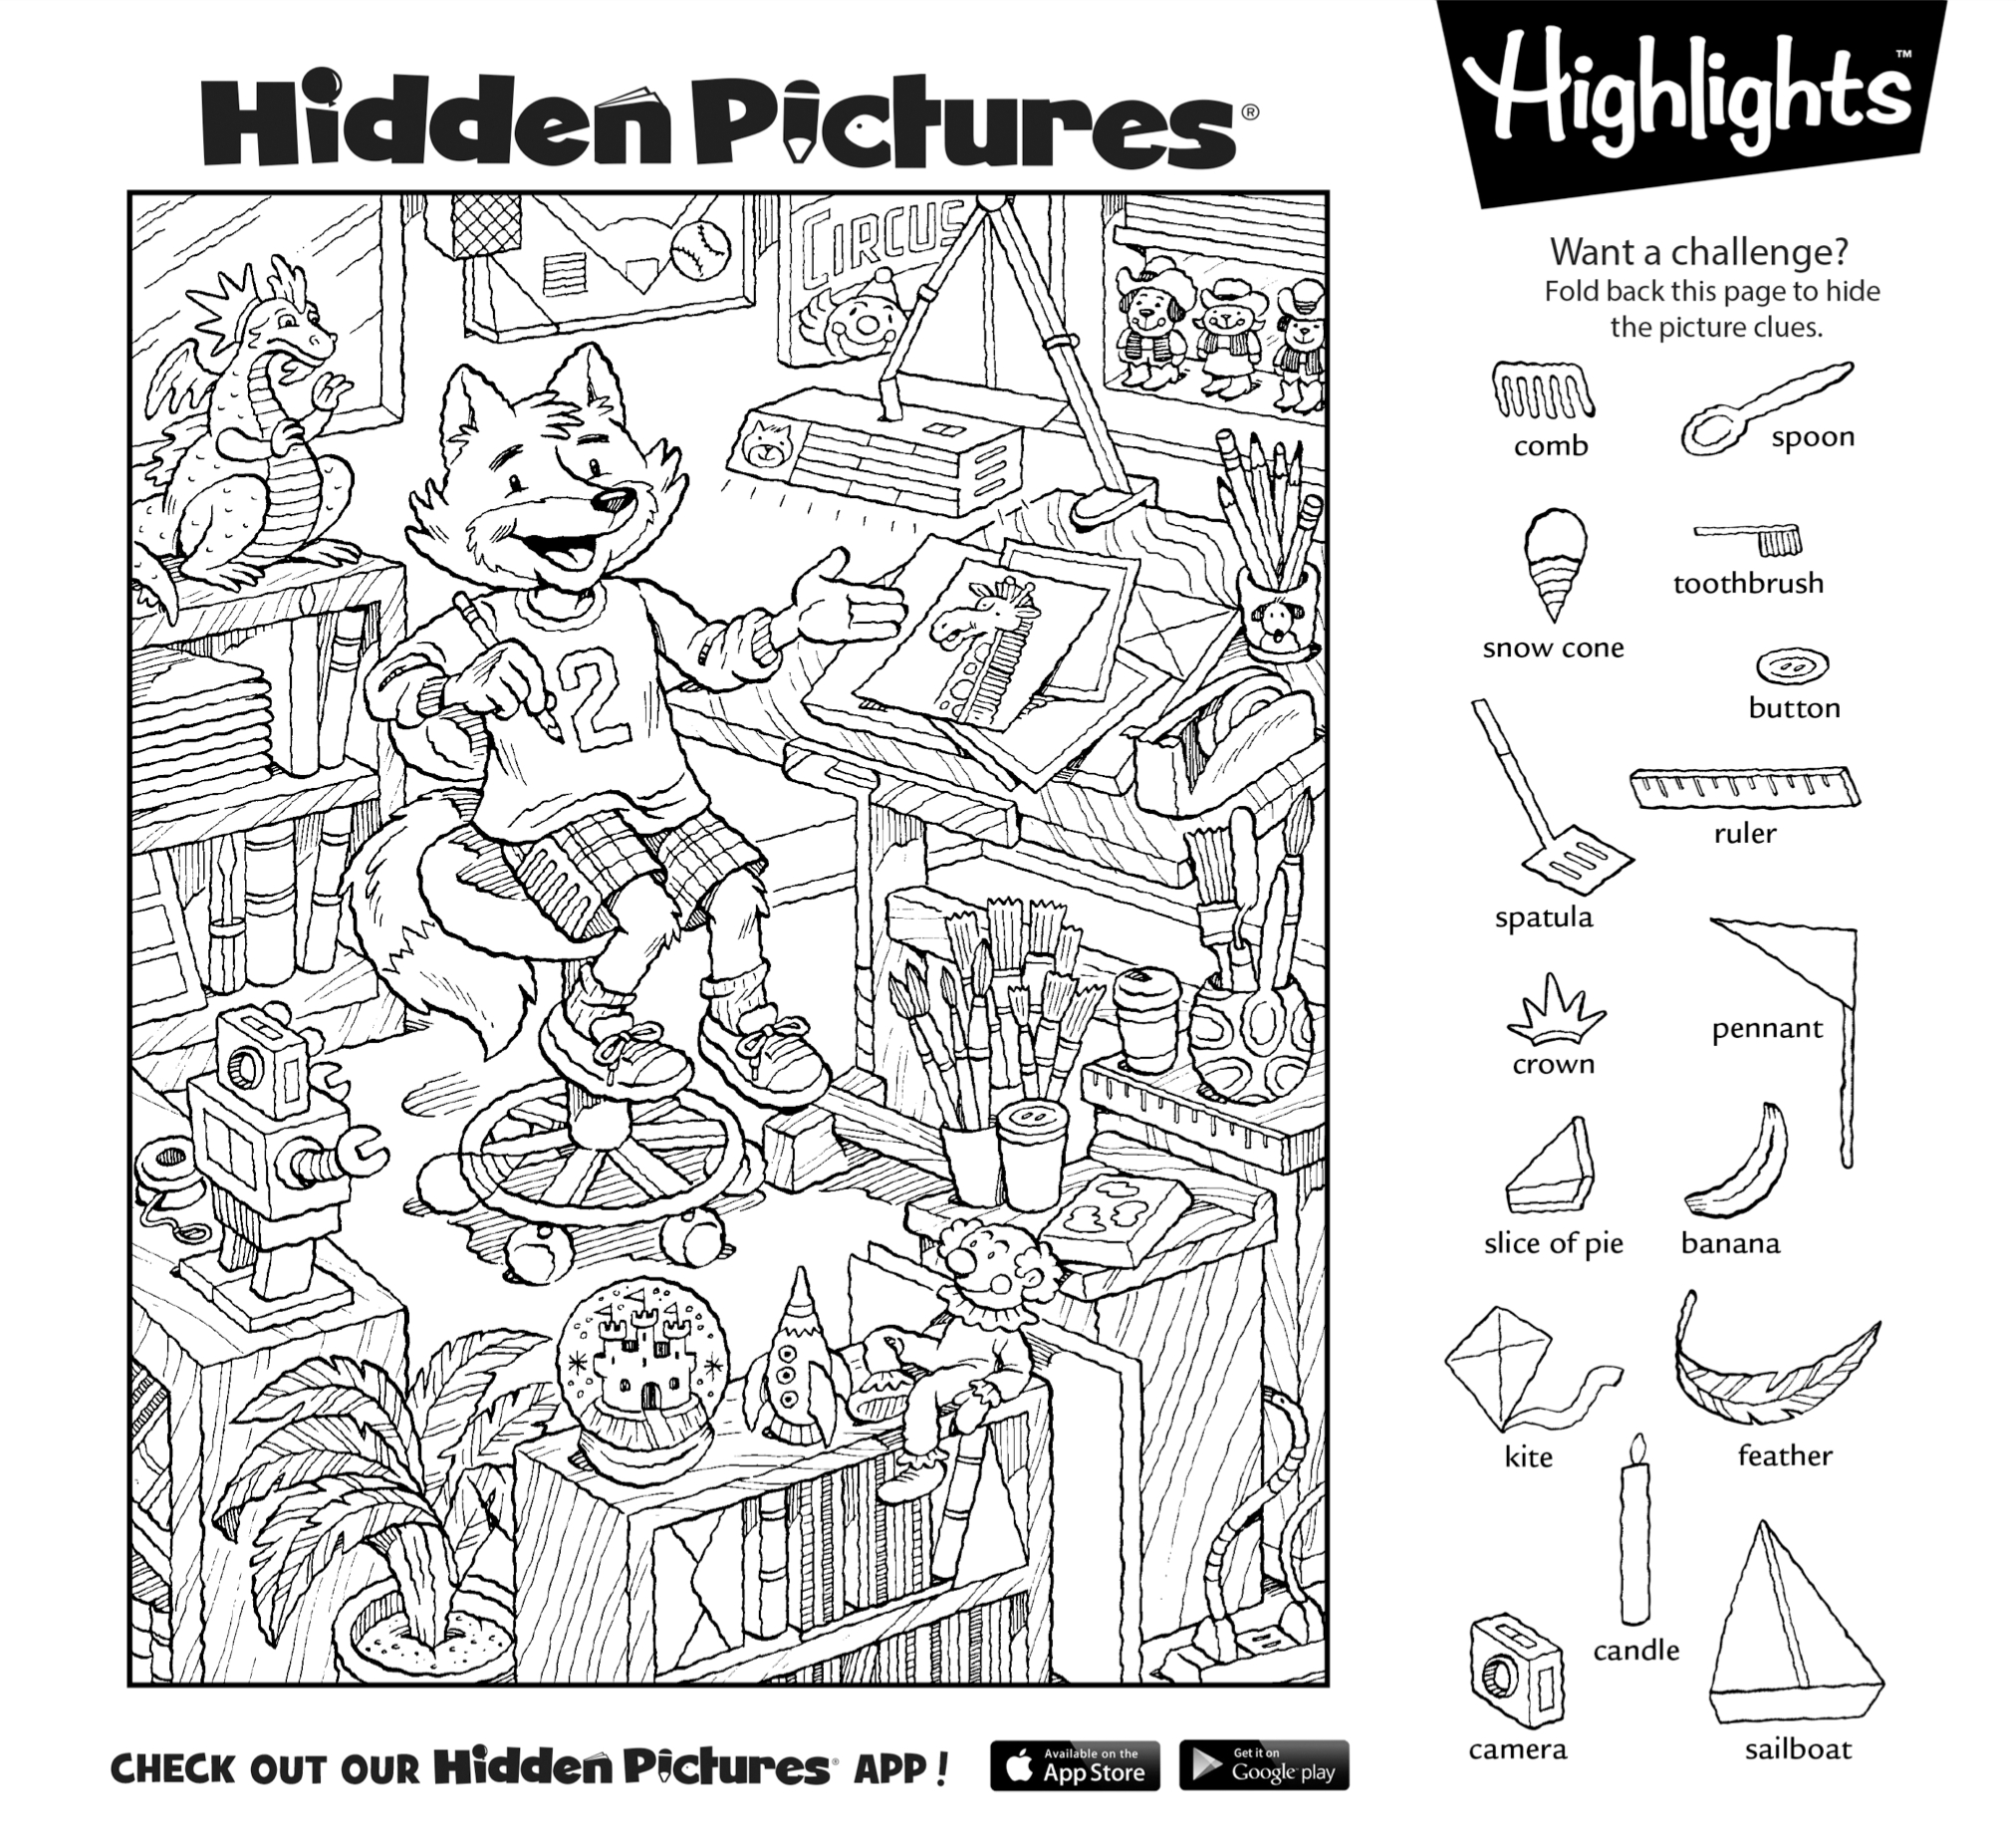 Download This Free Printable Hidden Pictures Puzzle To Share With - Printable Hidden Puzzle Pictures